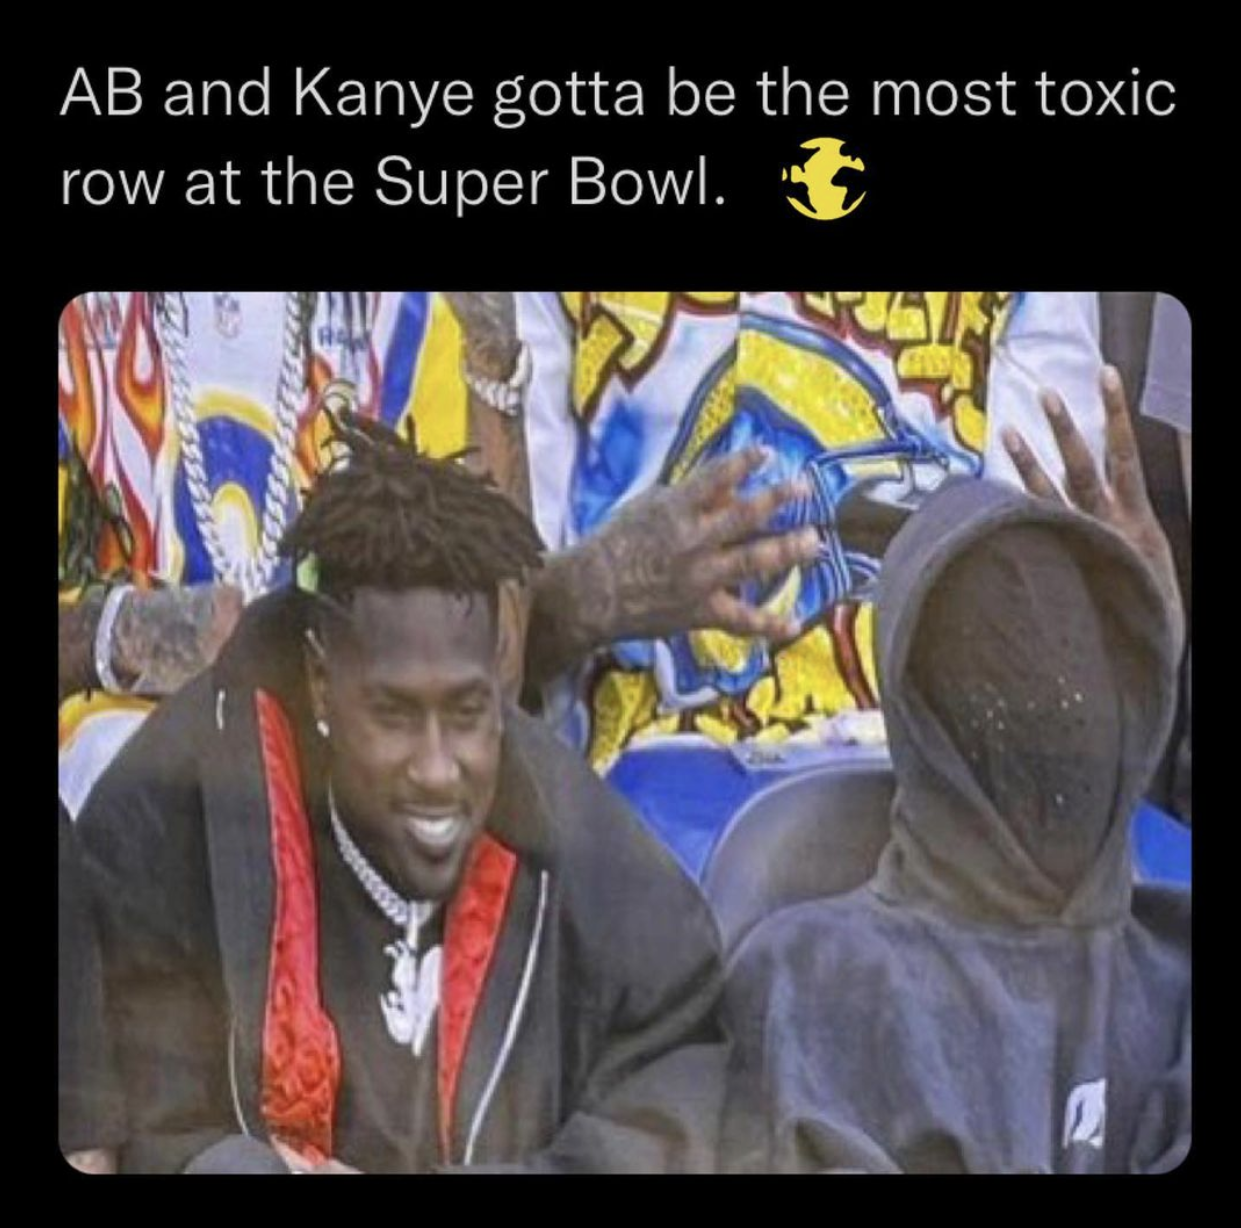 super bowl memes 2022 - bootswatch - Ab and Kanye gotta be the most toxic row at the Super Bowl. 24